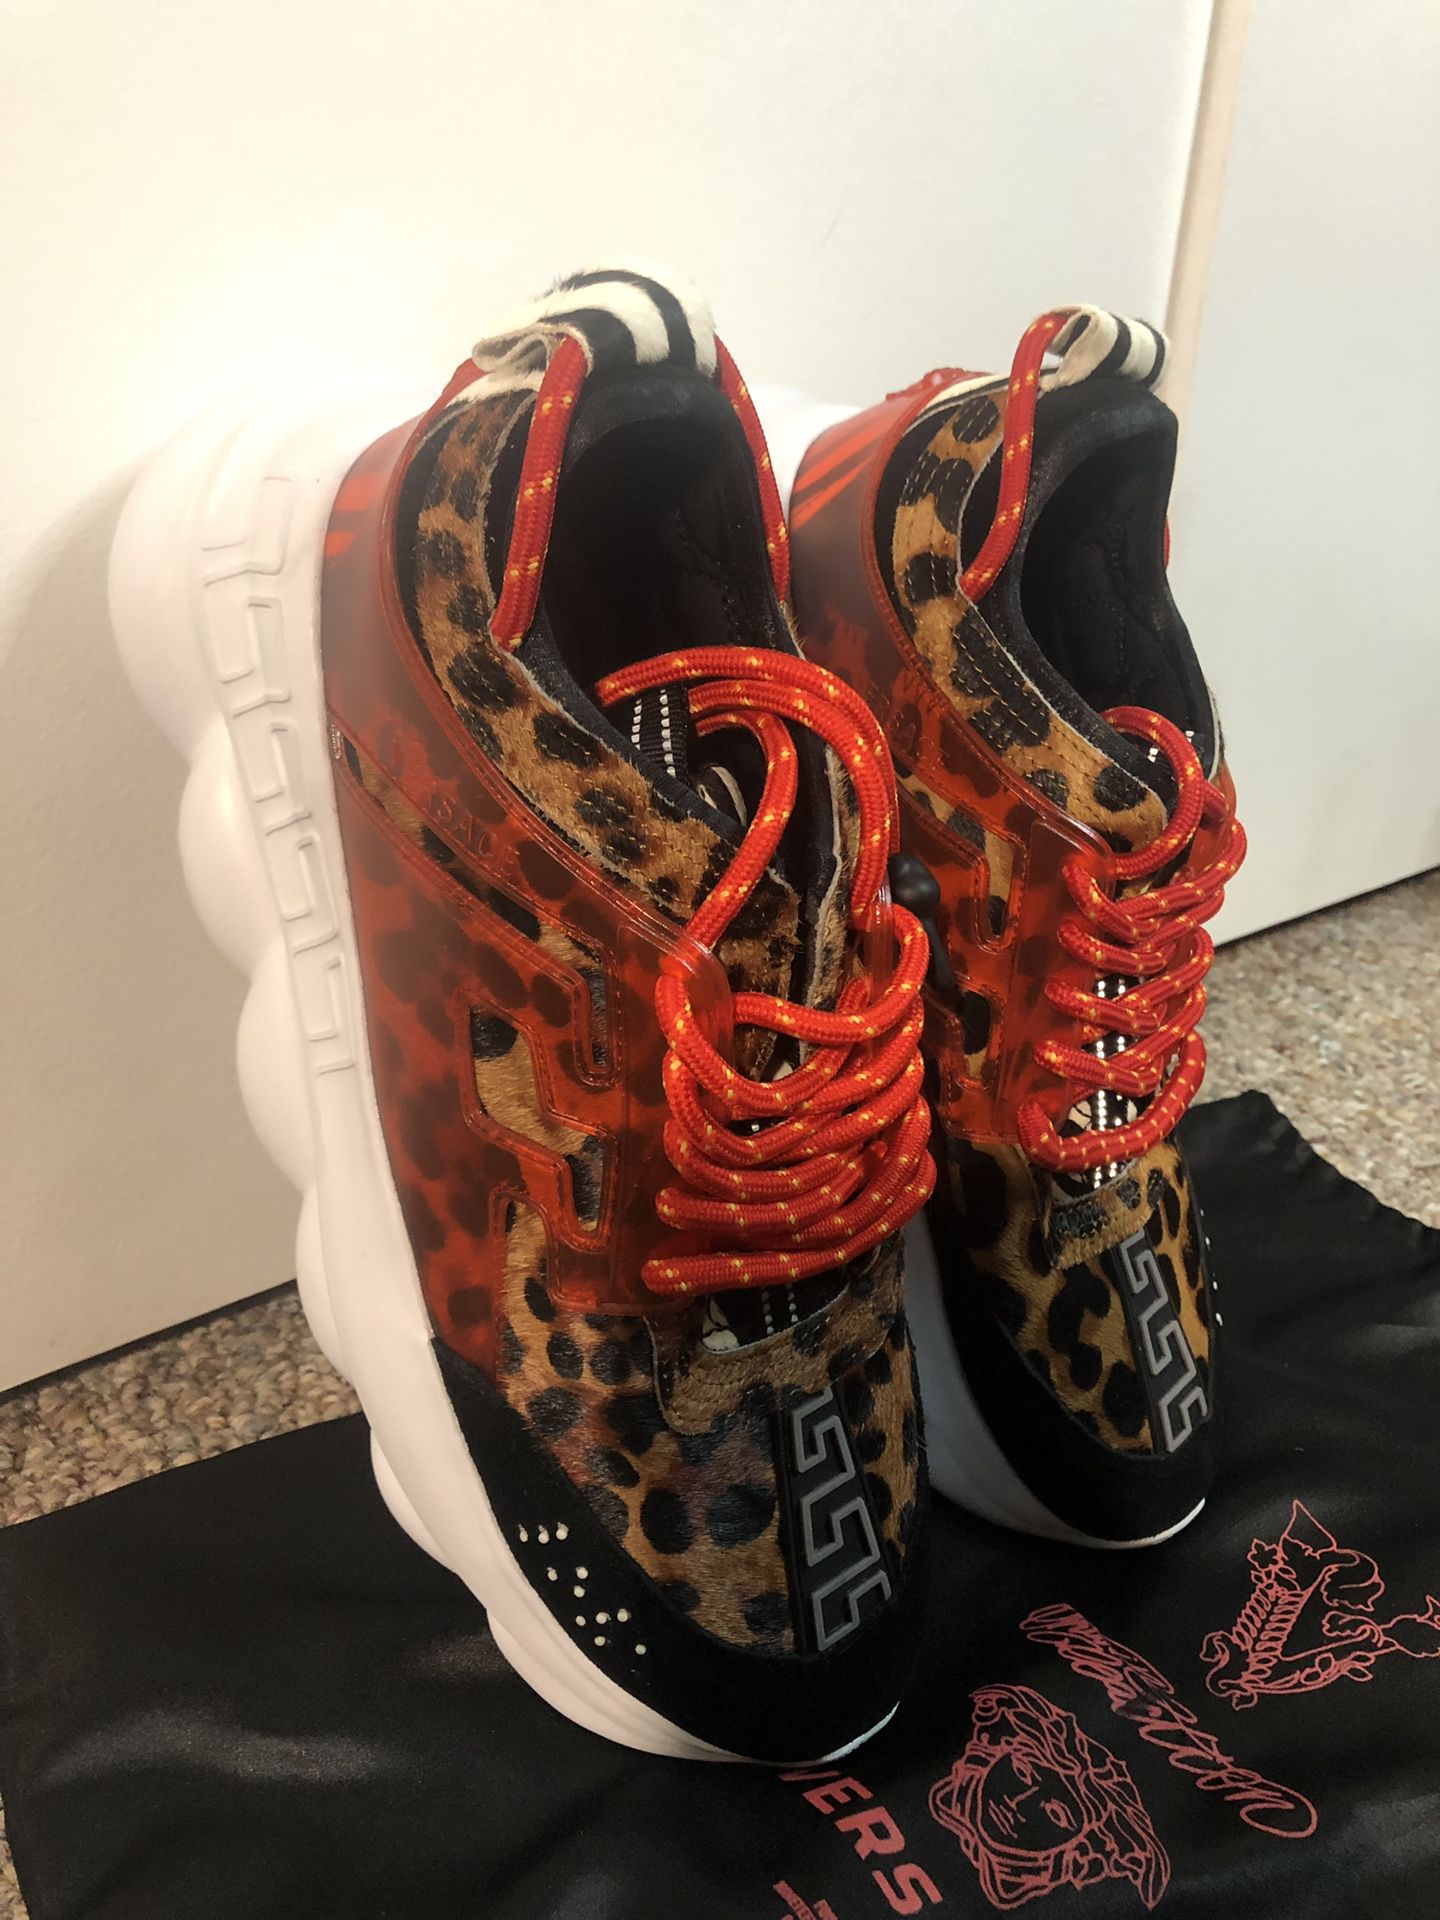 Versace chain reaction size 43EUR and 10 US